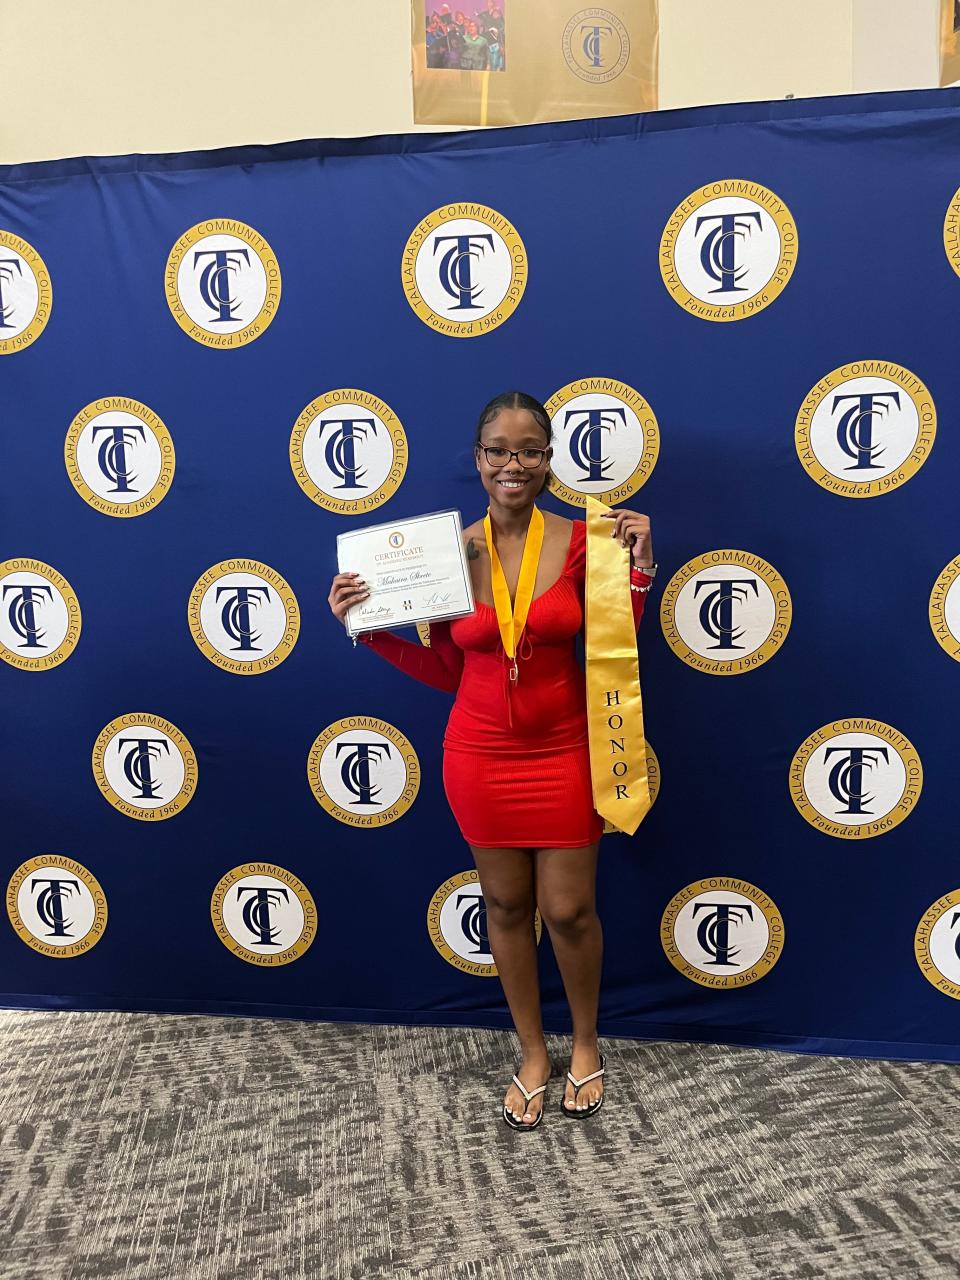 TCC graduating student Makaira Skeete holds up a certificate and a stole from TCC's Honors Program.